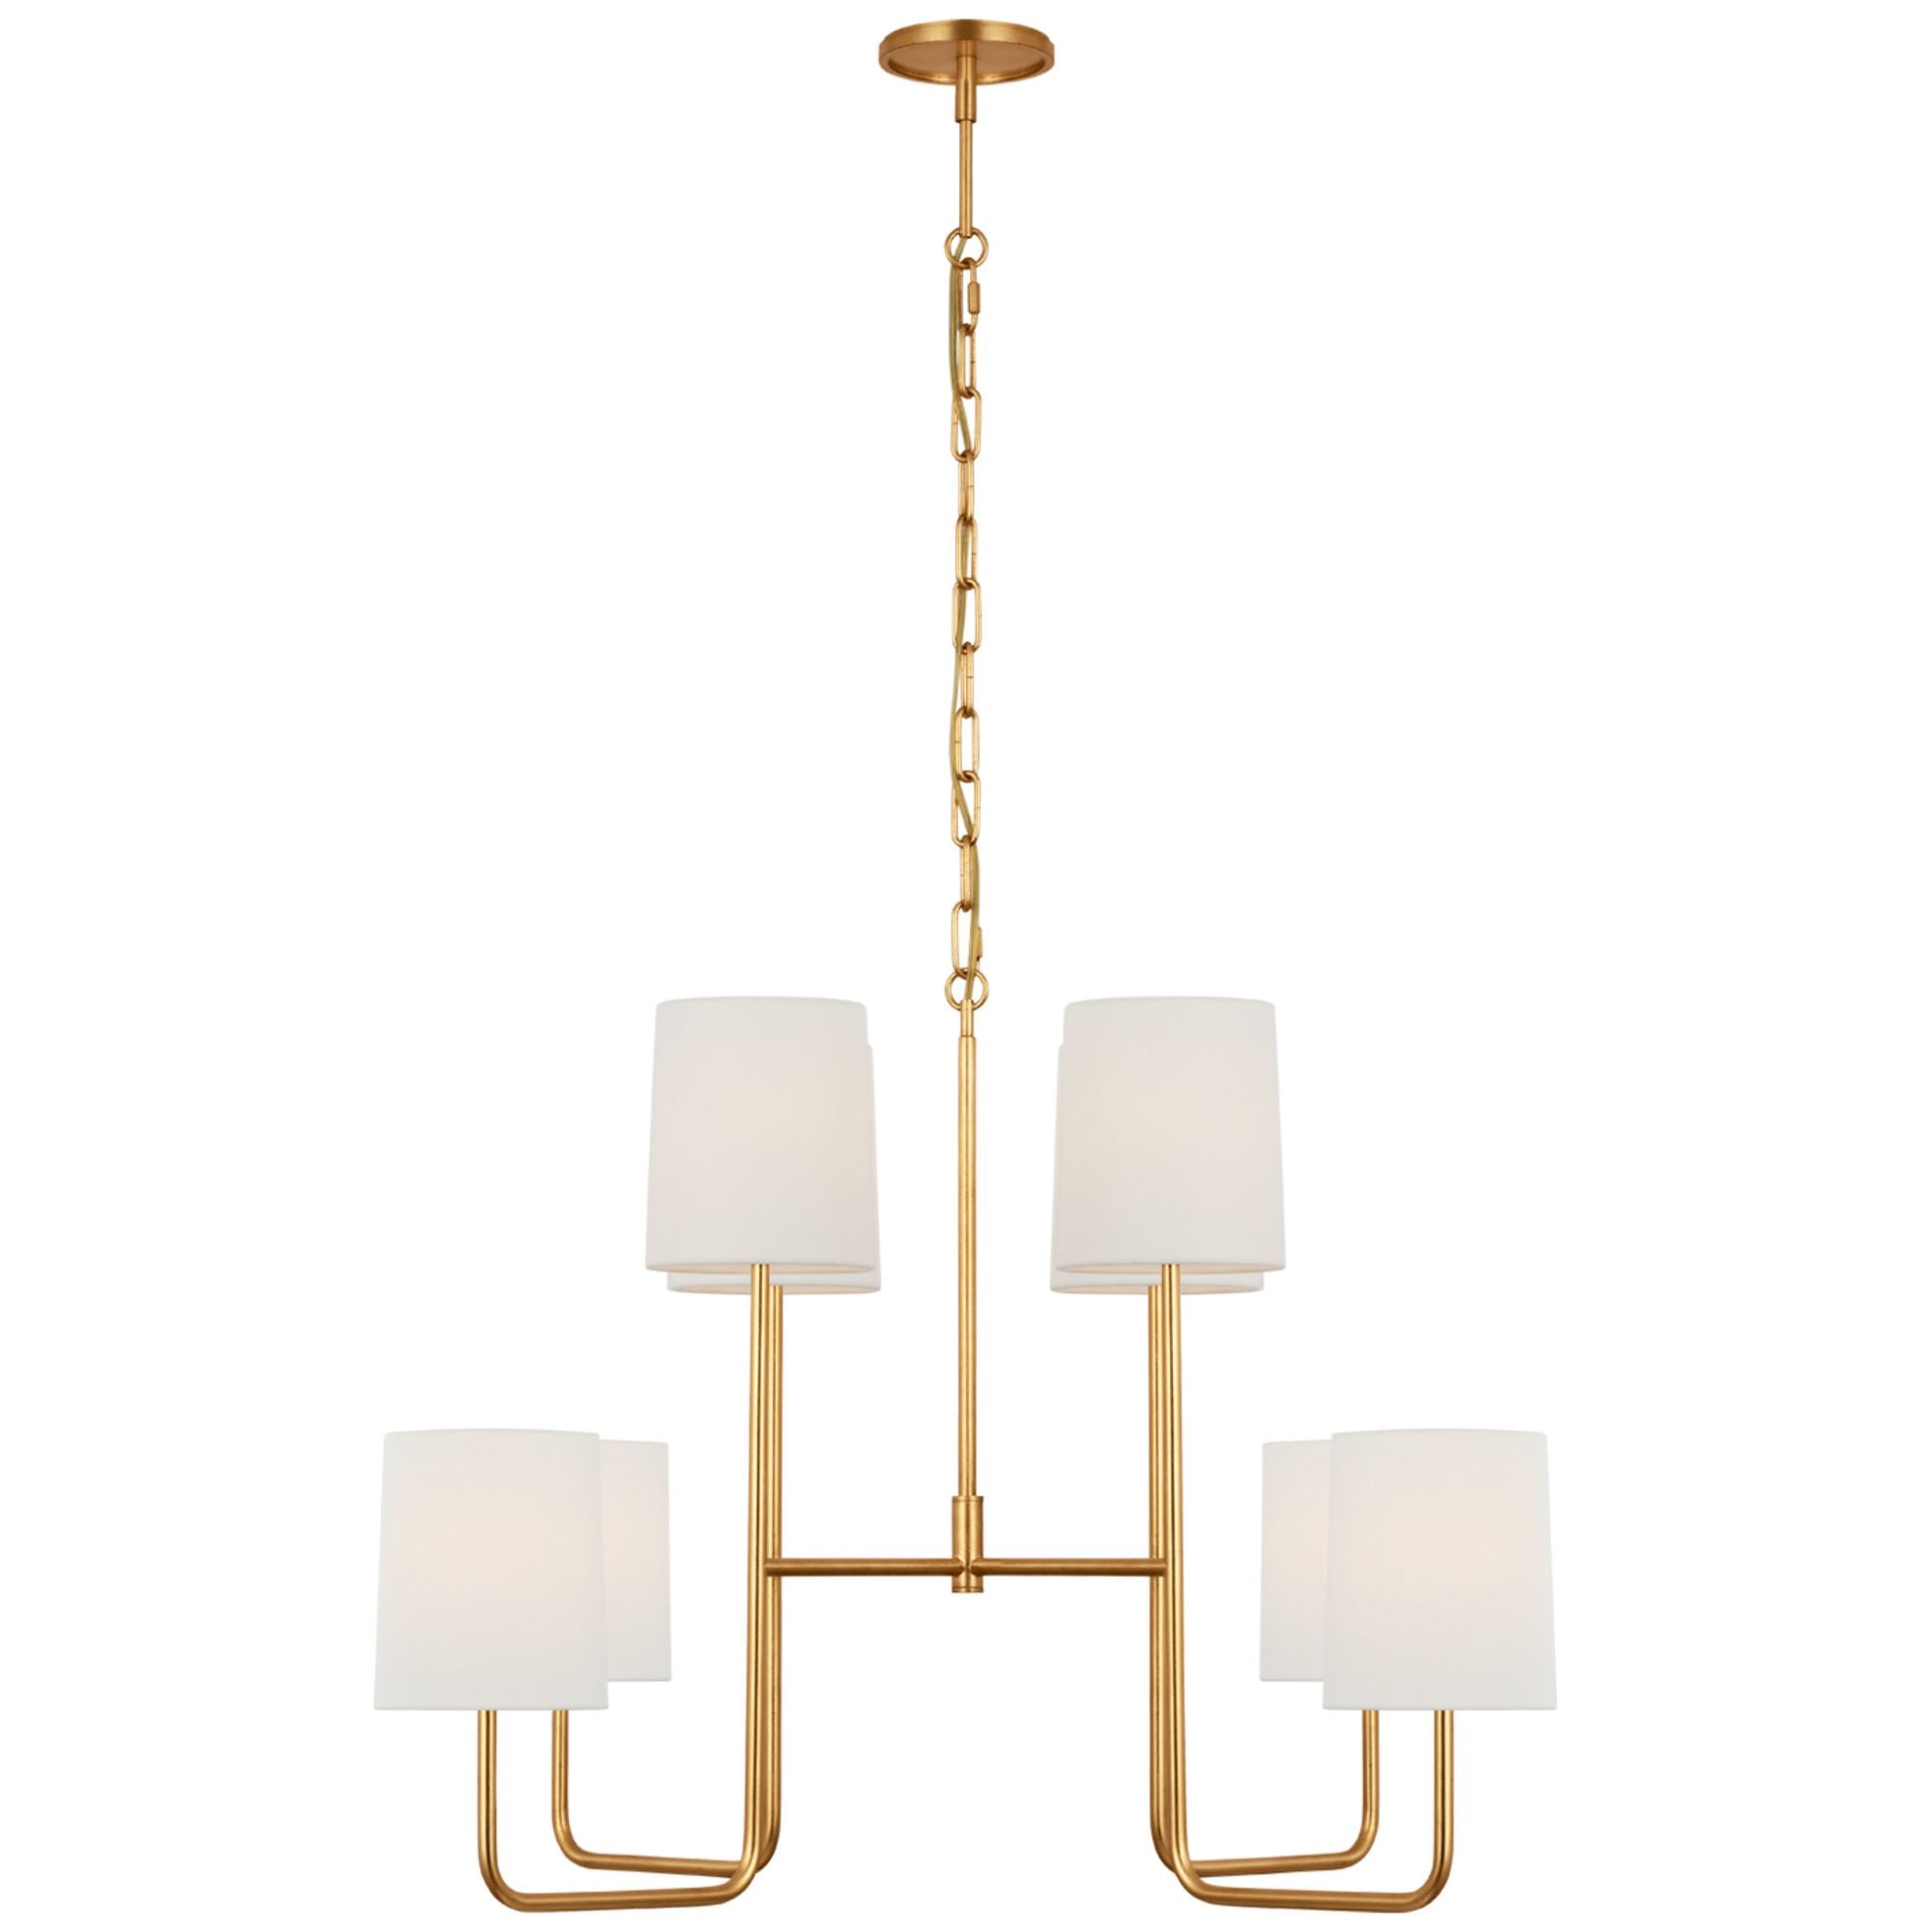 Barbara Barry Go Lightly Extra Large Two Tier Chandelier in Gild with Linen Shades